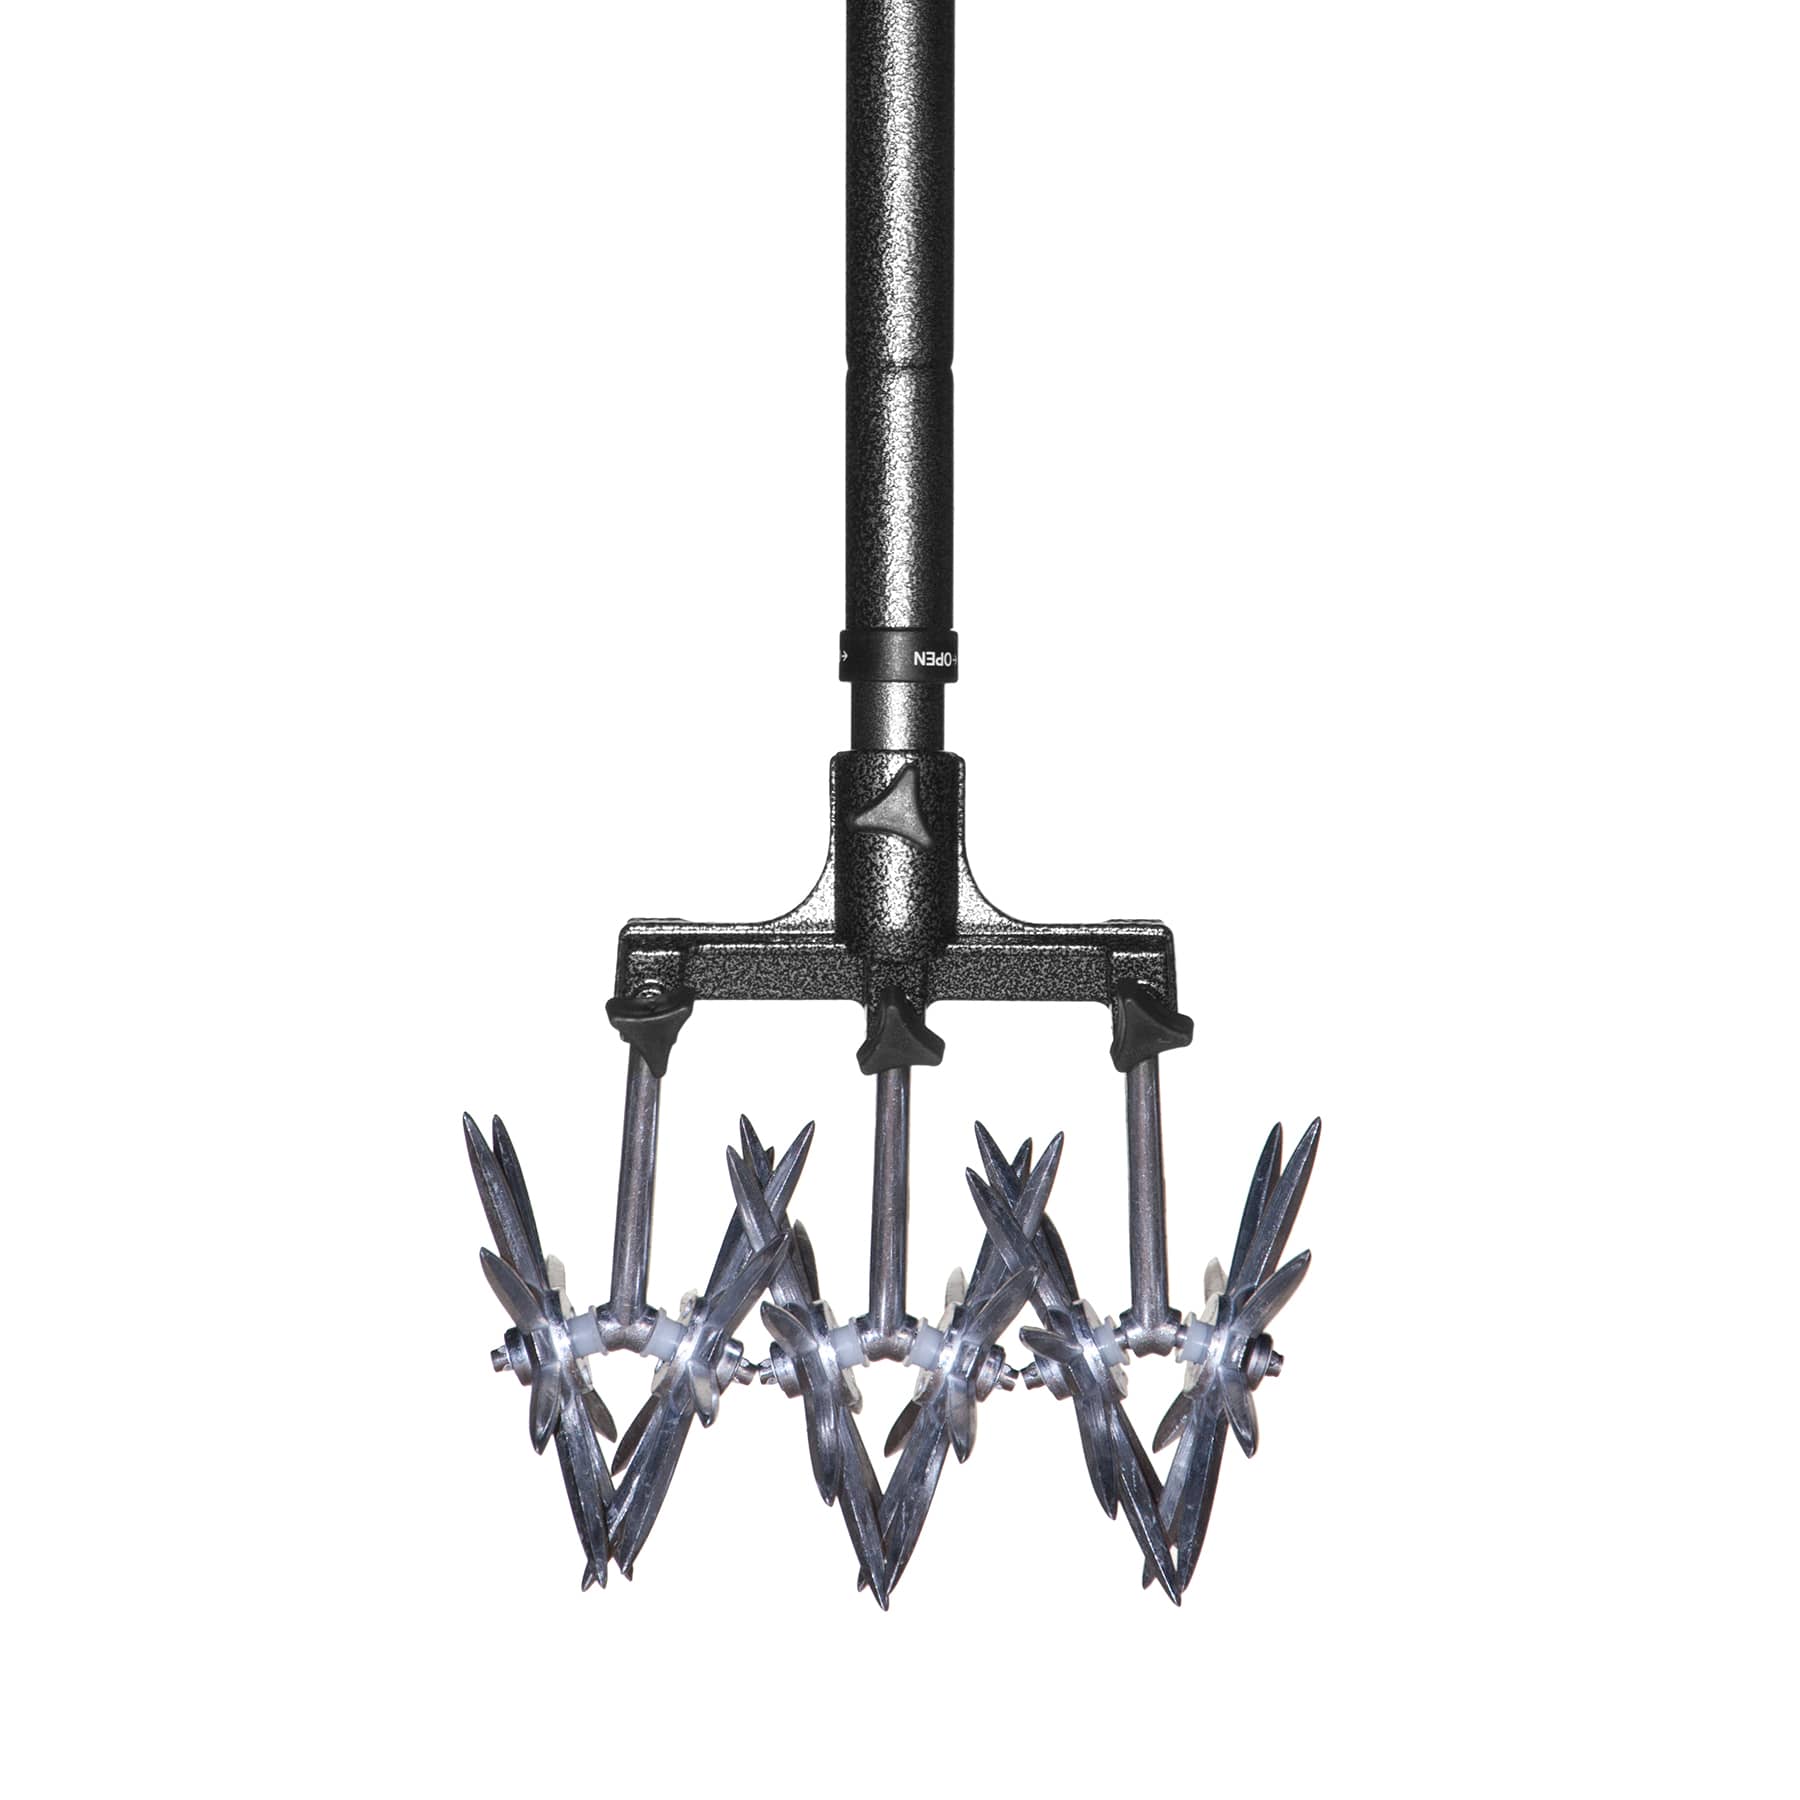 Adjustable Rotary Cultivator